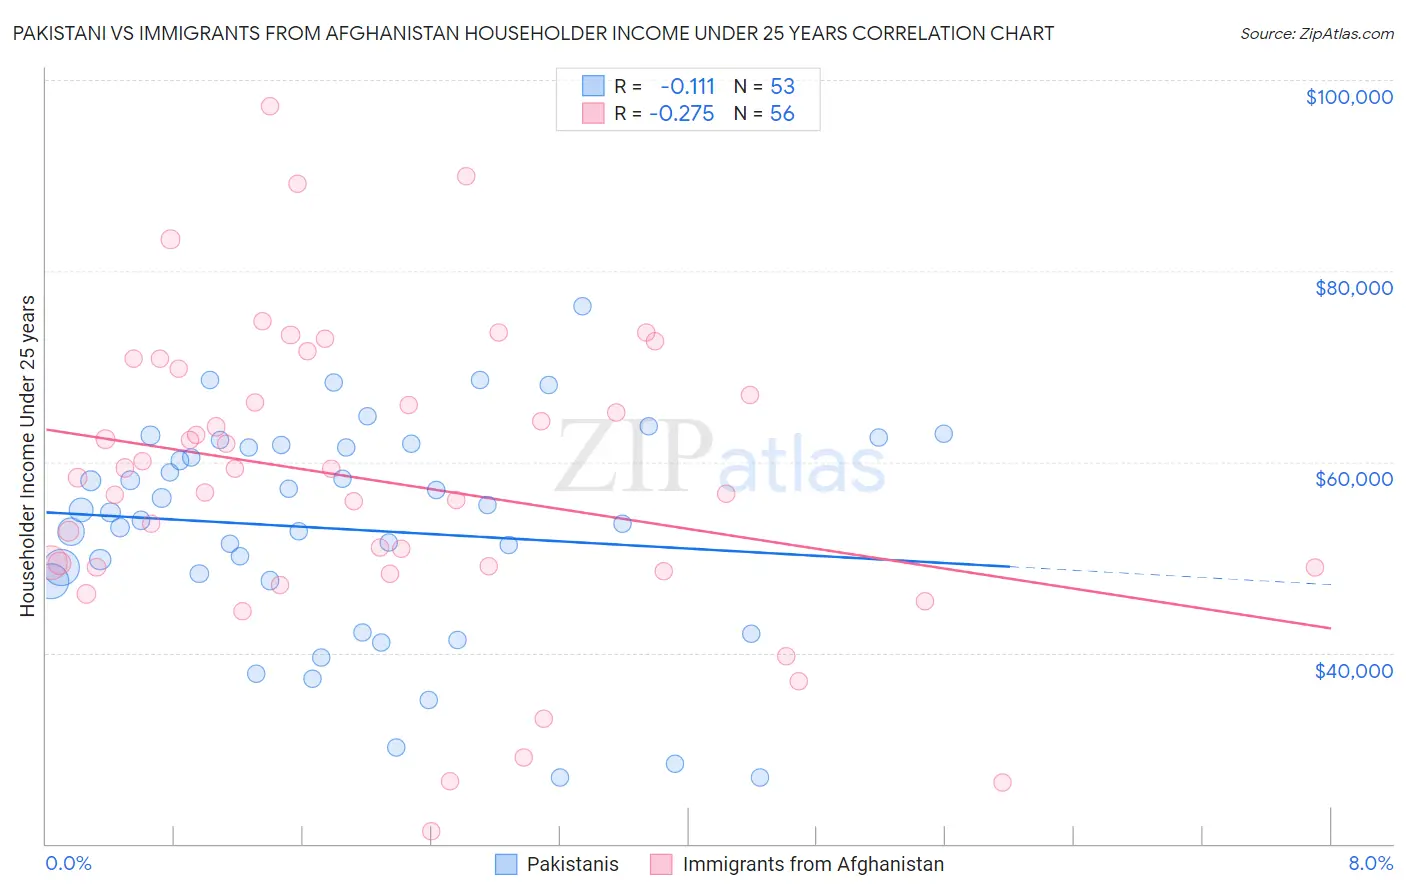 Pakistani vs Immigrants from Afghanistan Householder Income Under 25 years